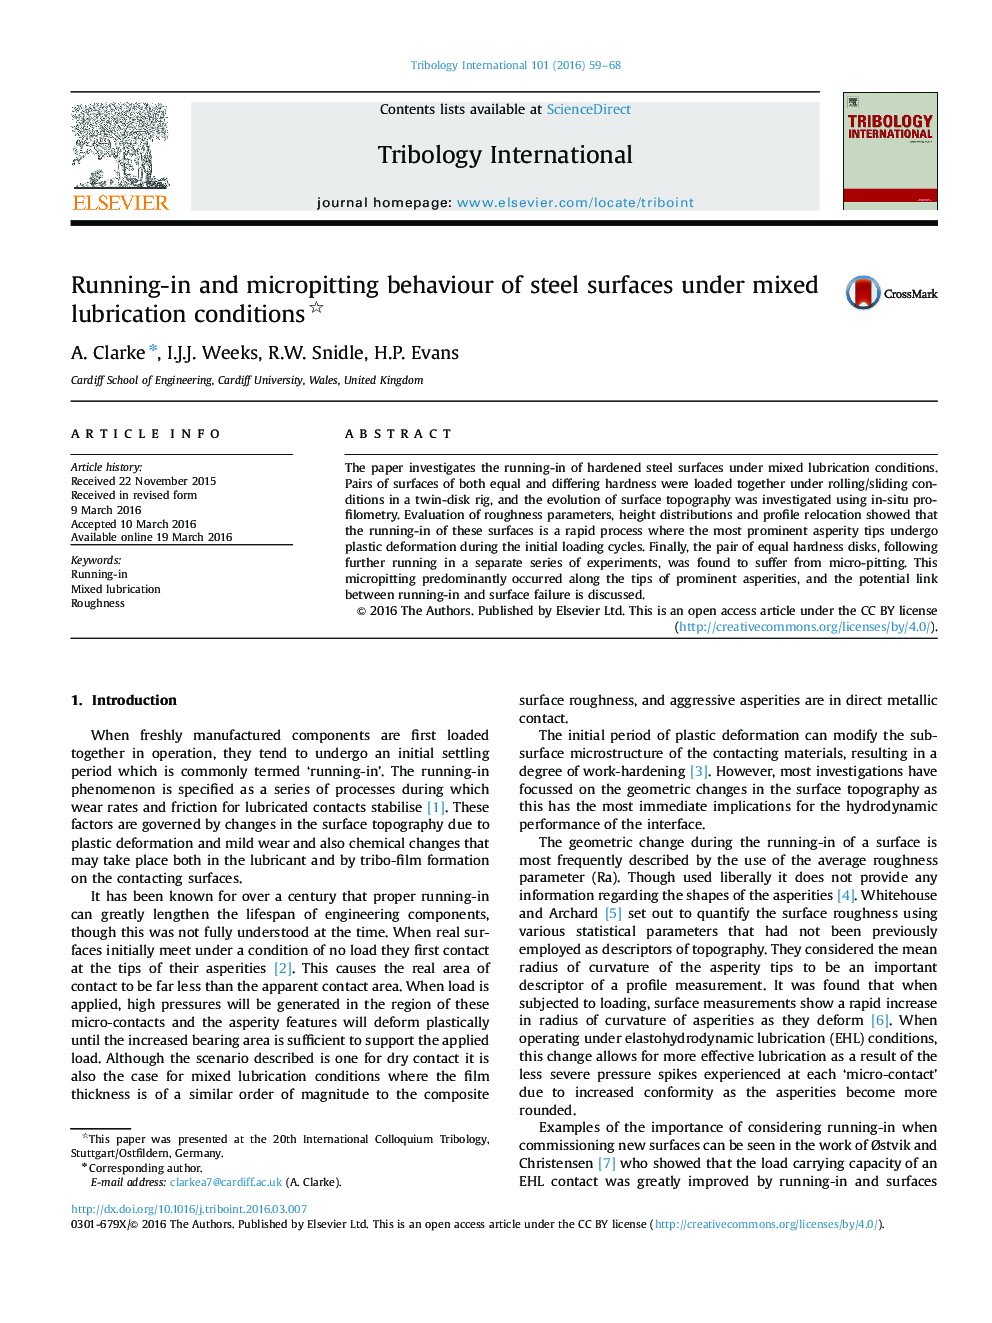 Running-in and micropitting behaviour of steel surfaces under mixed lubrication conditions